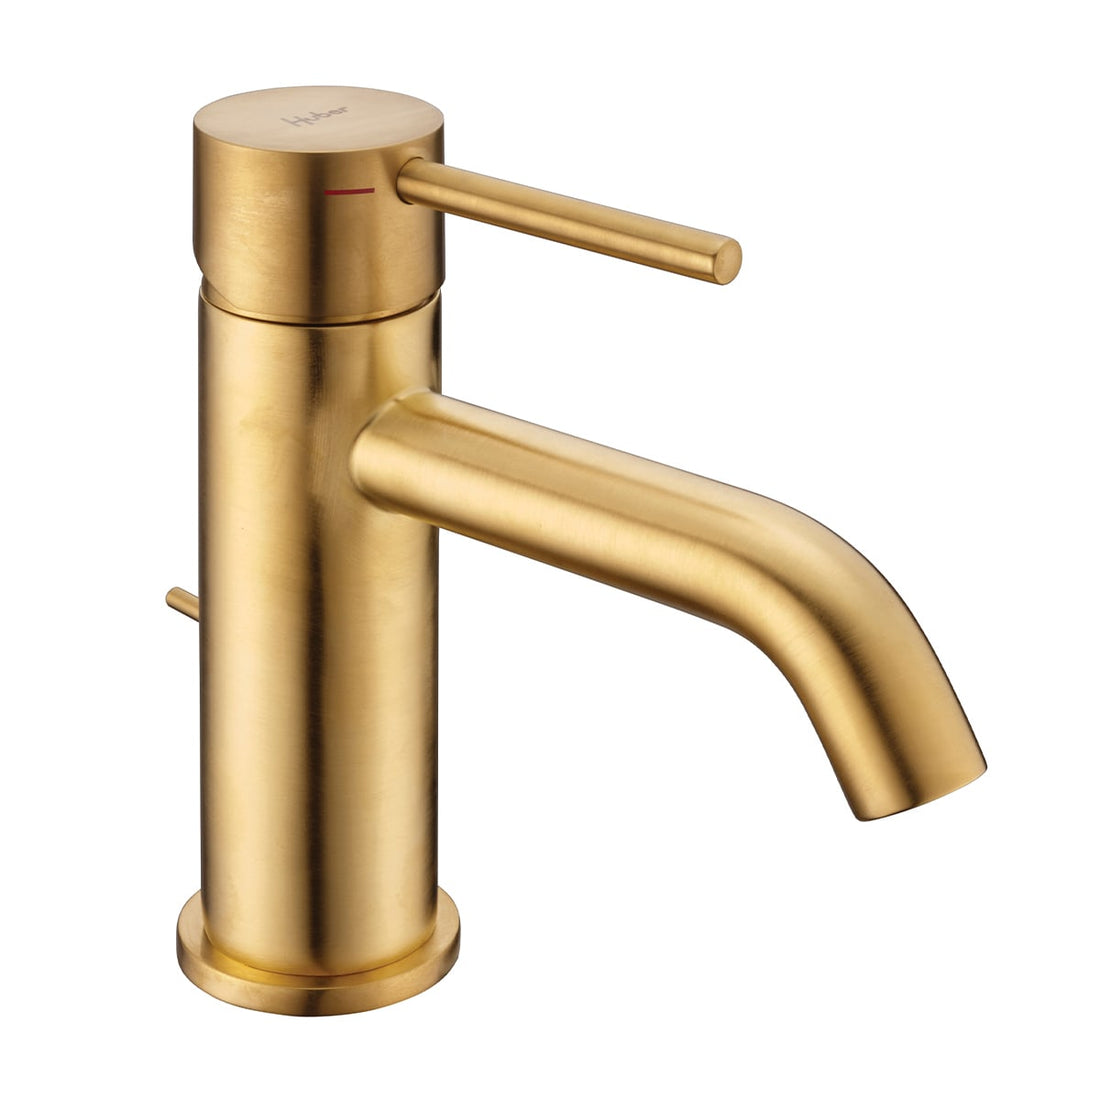 TAYRONA BASIN MIXER WITH BRUSHED GOLD WASTE - best price from Maltashopper.com BR430009062